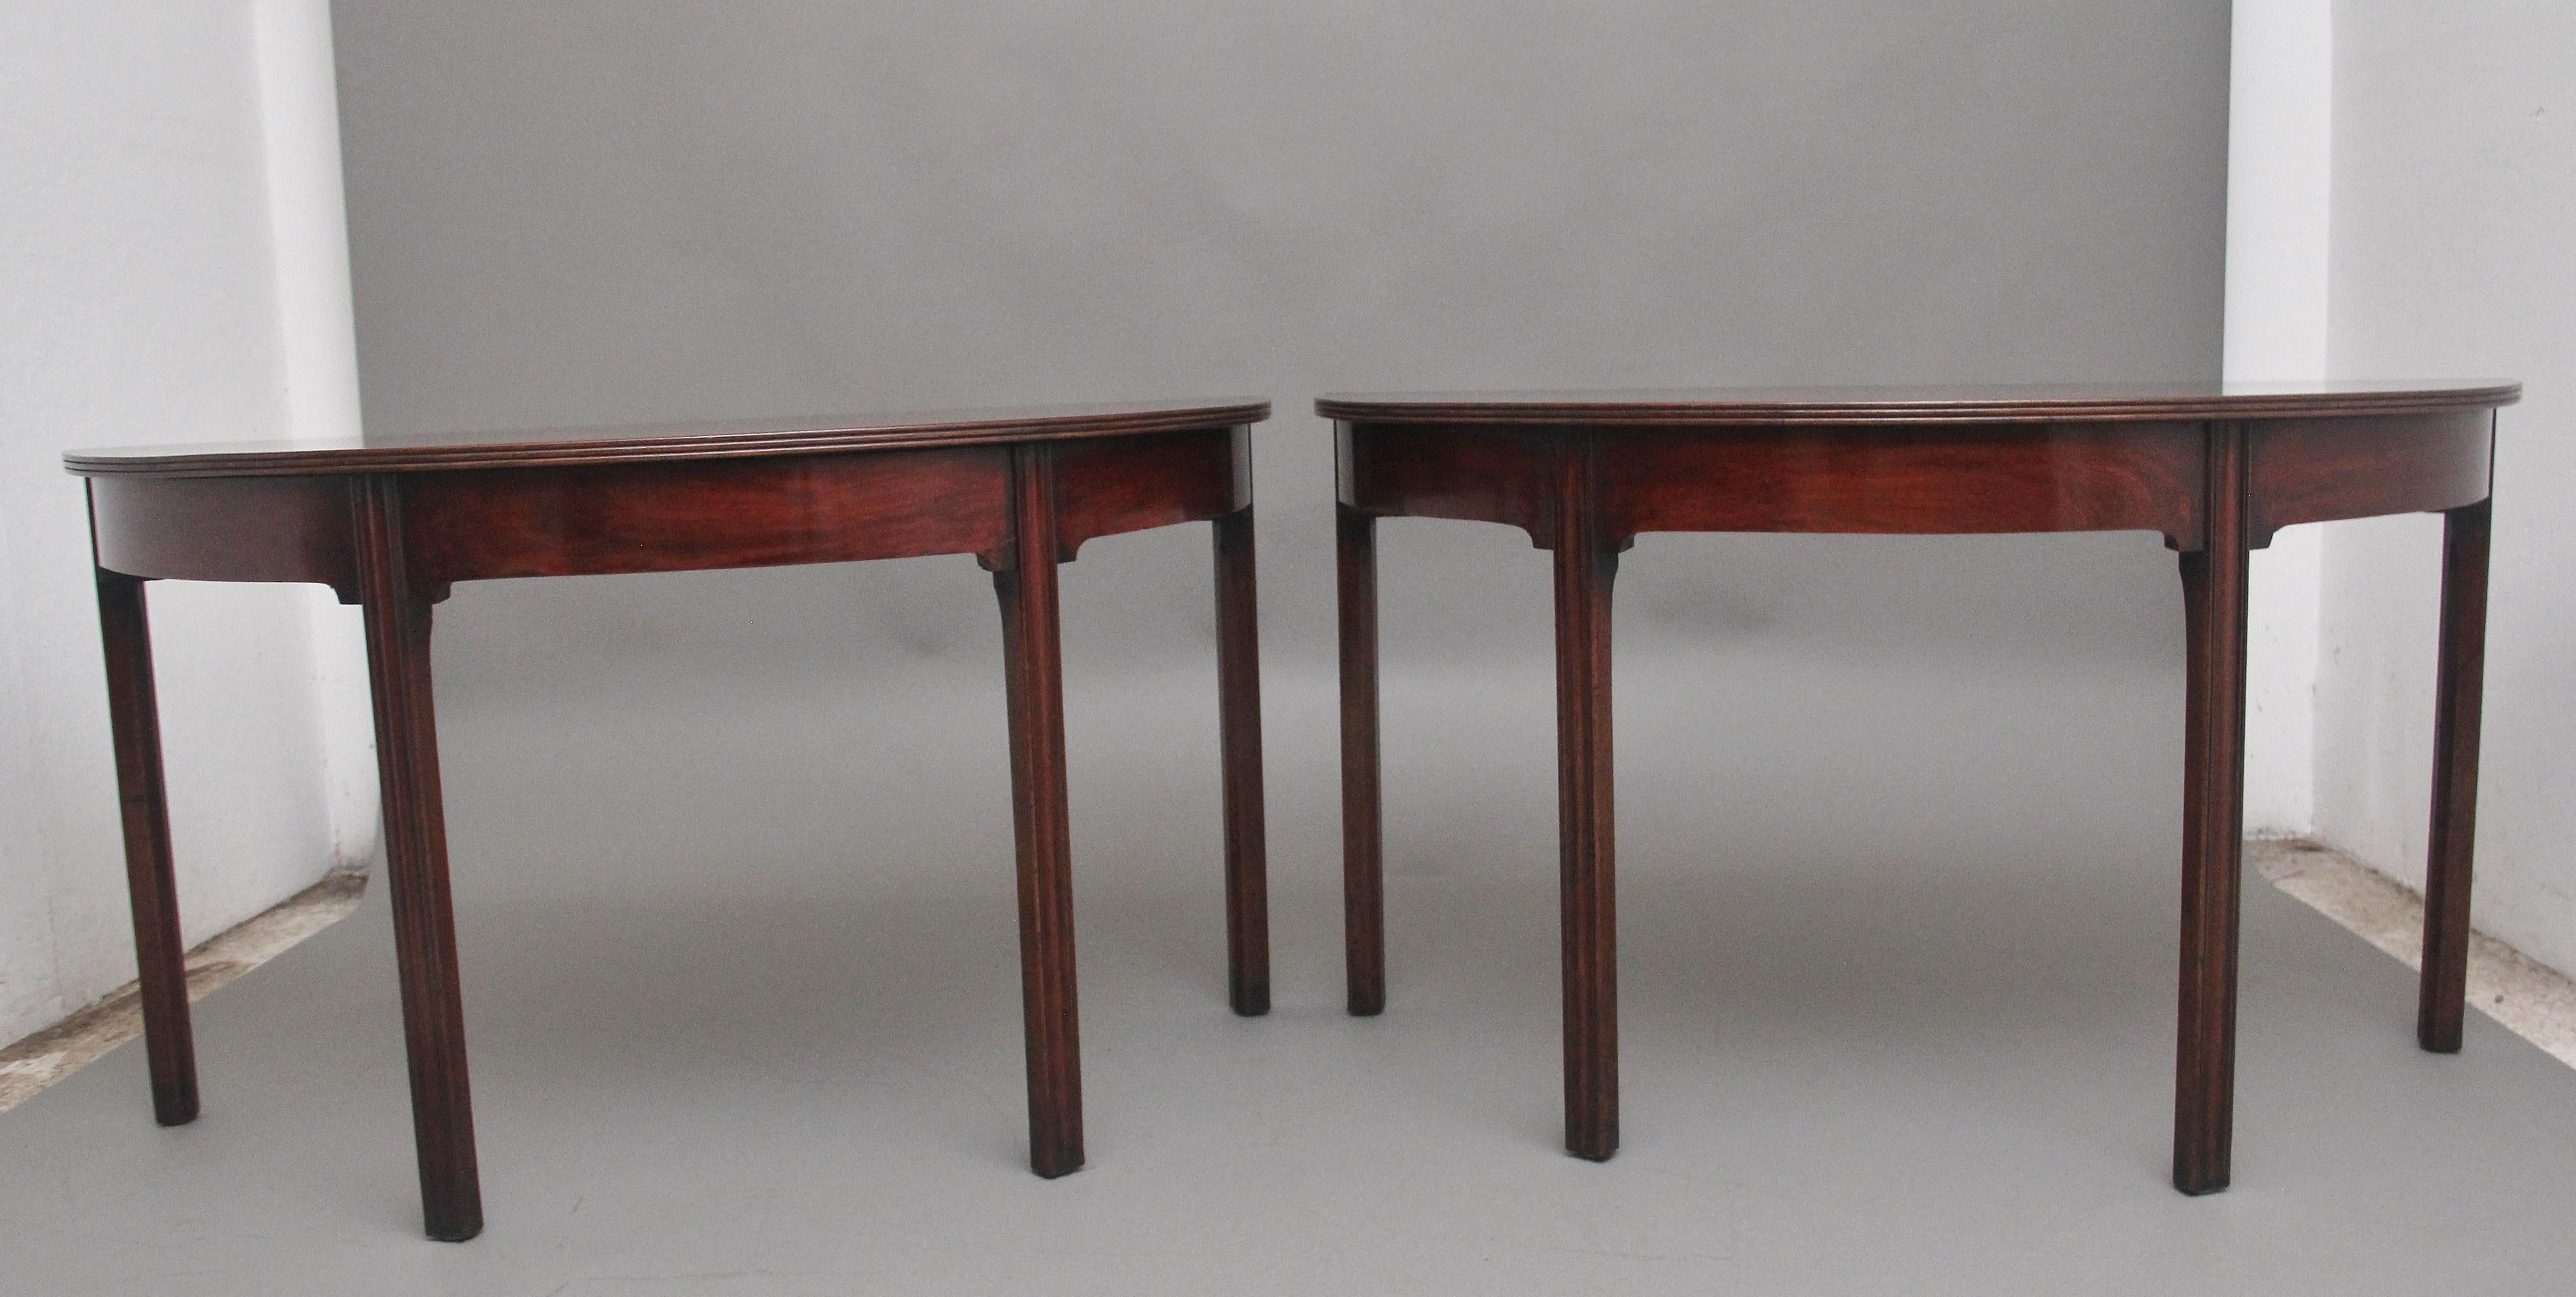 A fine pair of early 19th Century mahogany demi-lune console tables, having lovely figured tops with a reeded edge above a shaped frieze, supported on square legs, lovely colour and in excellent condition.  Circa 1810.
 